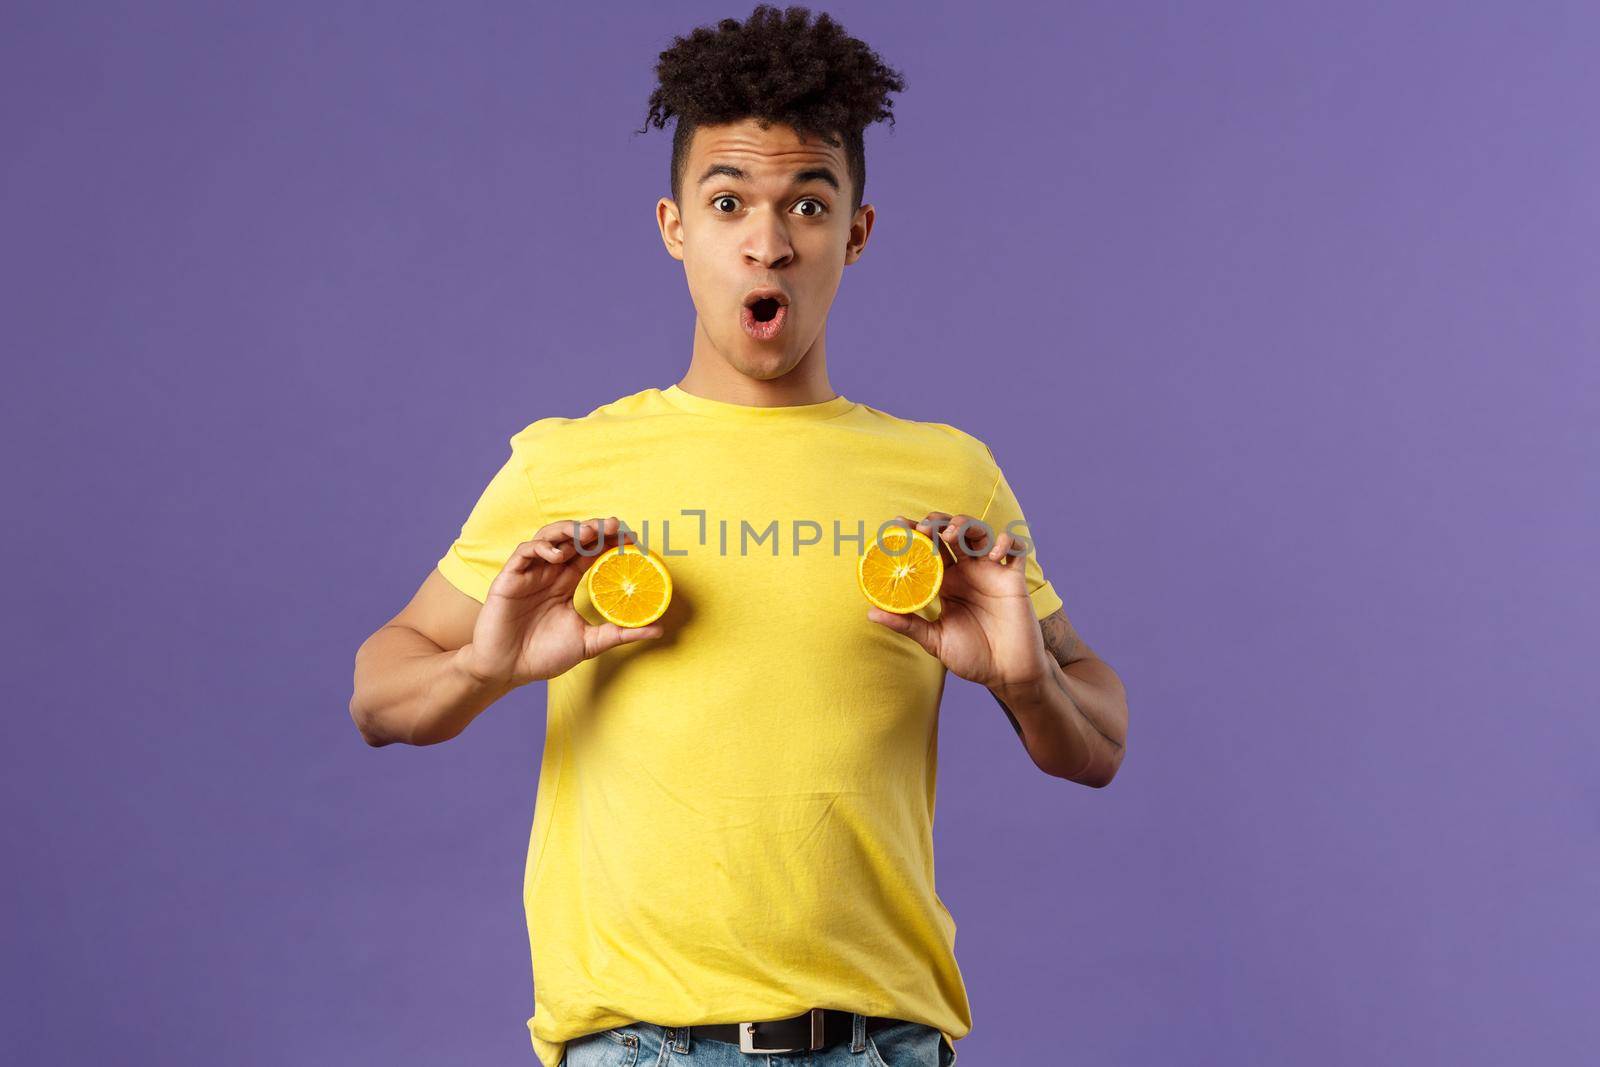 Holidays, vitamins and vacation concept. Portrait of funny and cute young 25s man fool around, showing breast with pieces of oranges over chest, look ashamed or shocked, purple background.